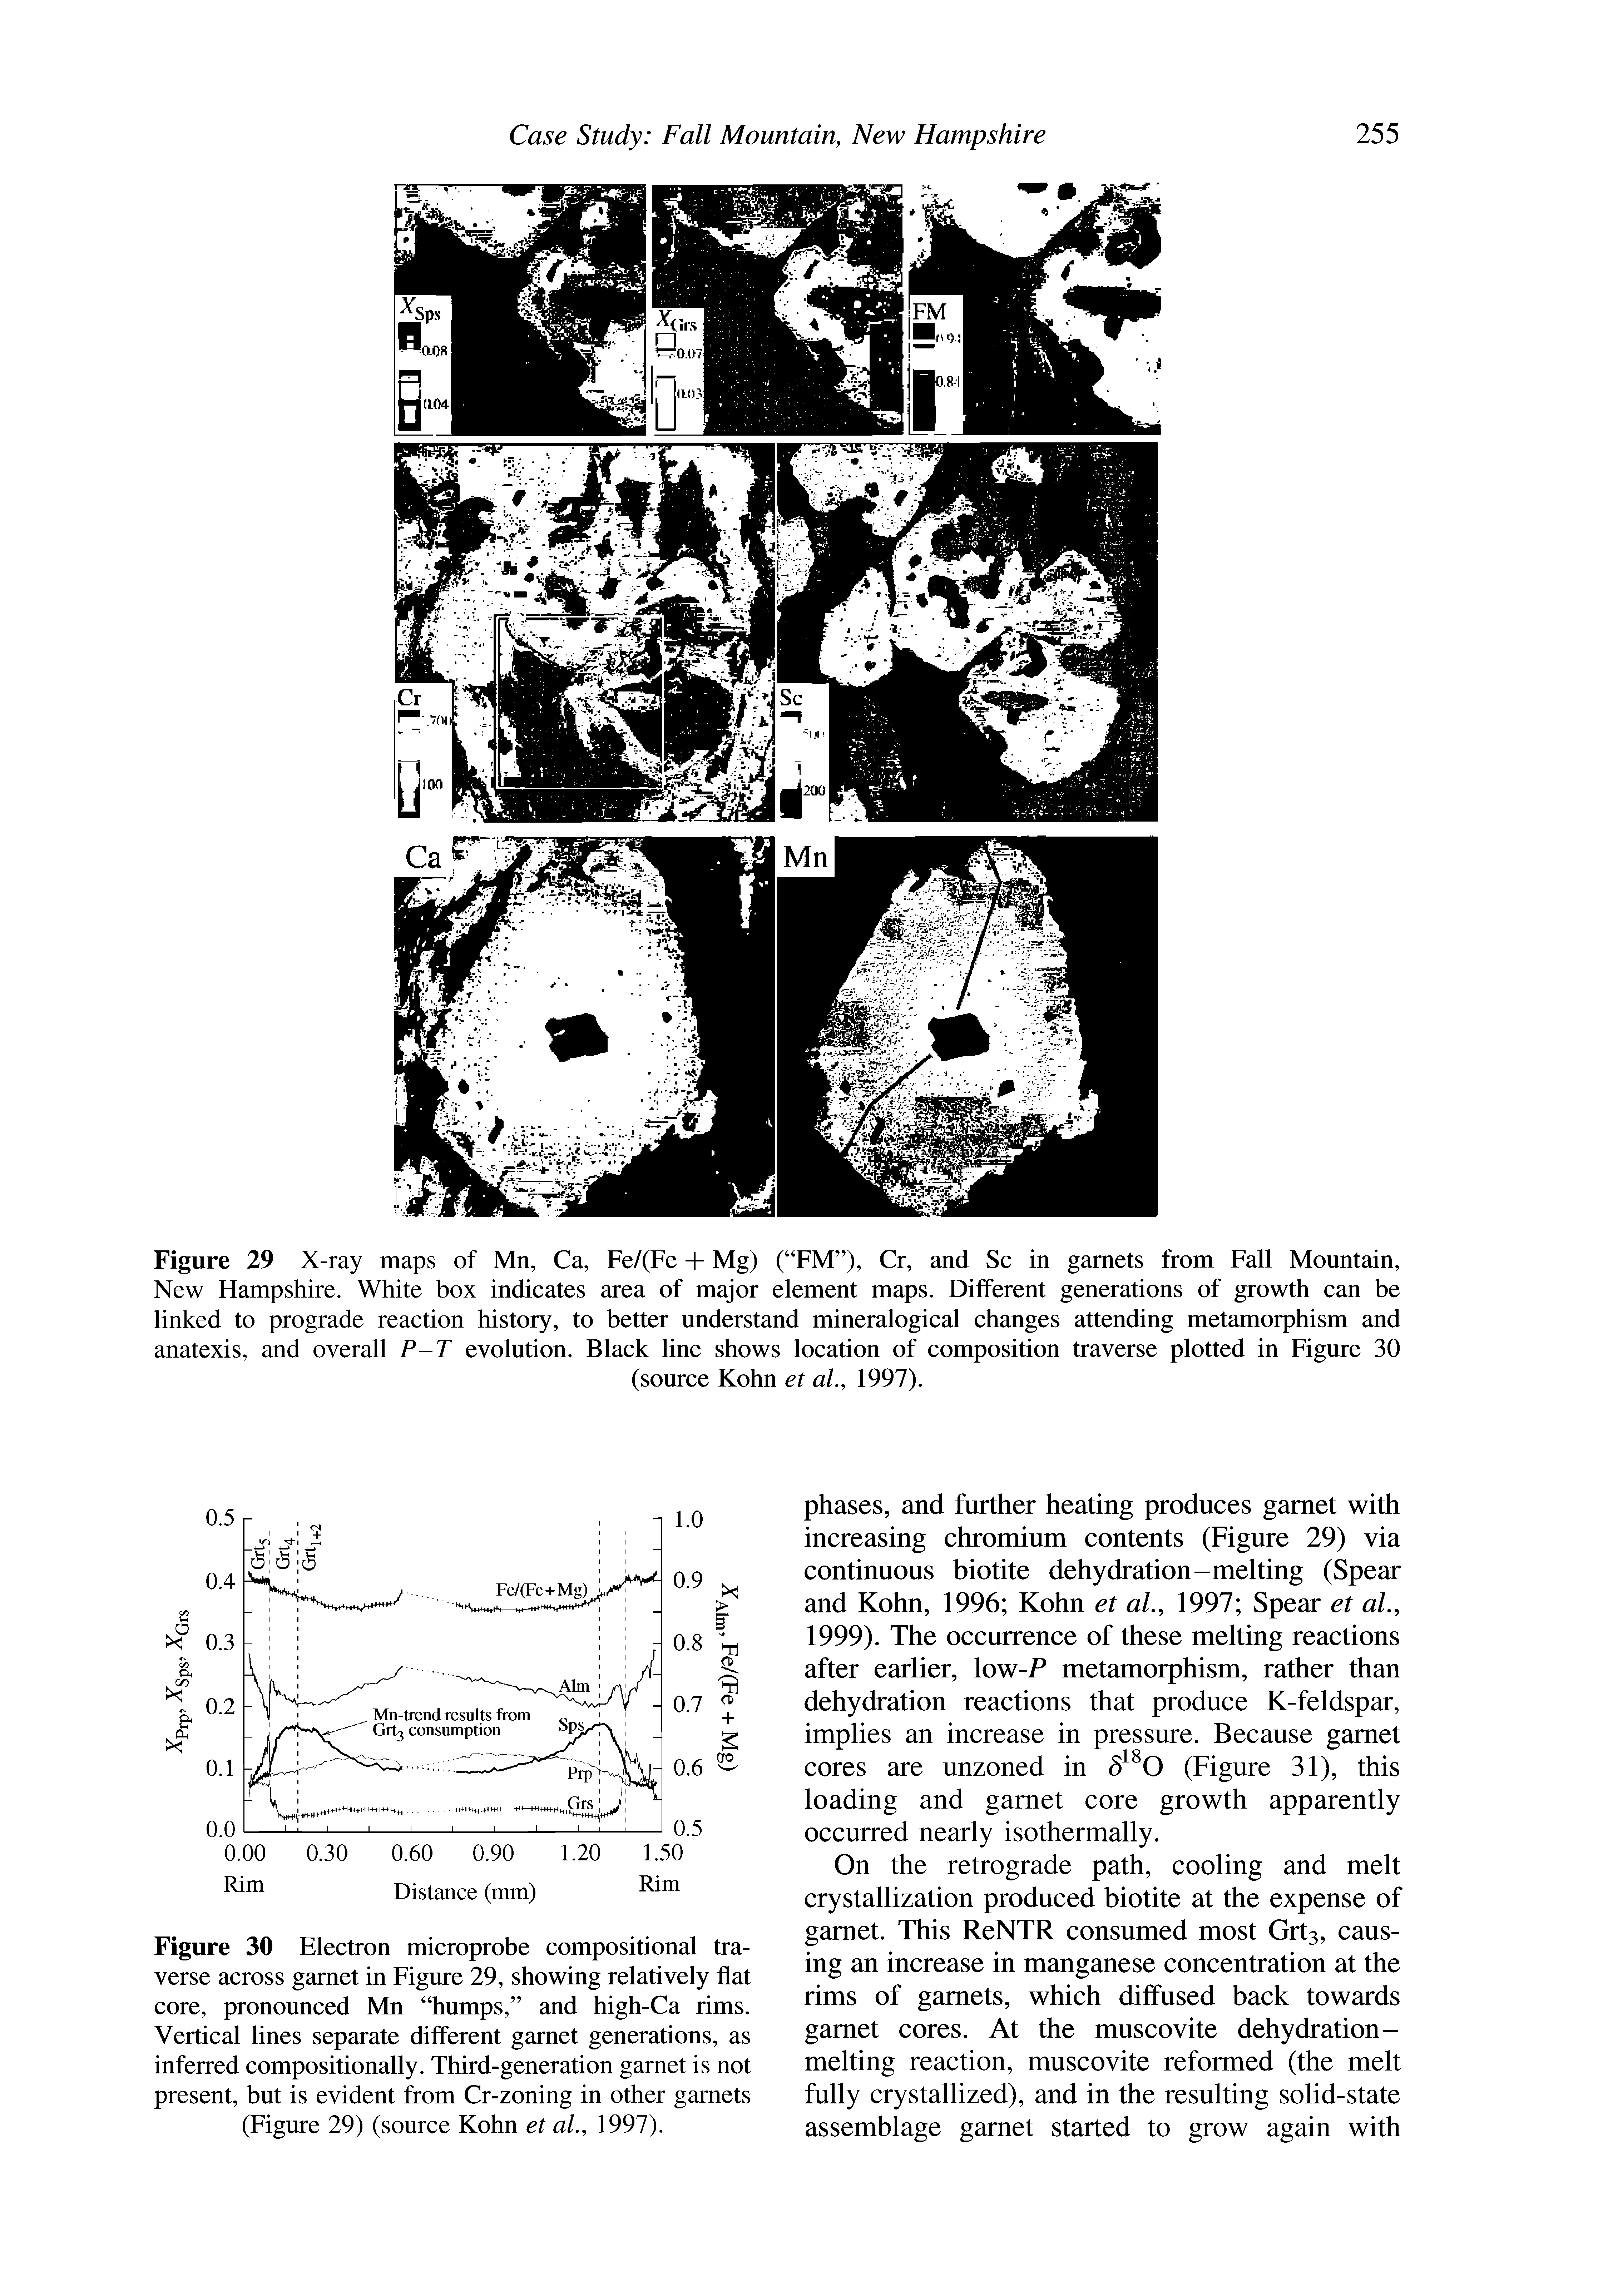 Figure 29 X-ray maps of Mn, Ca, Fe/(Fe + Mg) ( FM ), Cr, and Sc in garnets from Fall Mountain, New Hampshire. White box indicates area of major element maps. Different generations of growth can be linked to prograde reaction history, to better understand mineralogical changes attending metamorphism and anatexis, and overall P-T evolution. Black line shows location of composition traverse plotted in Figure 30...